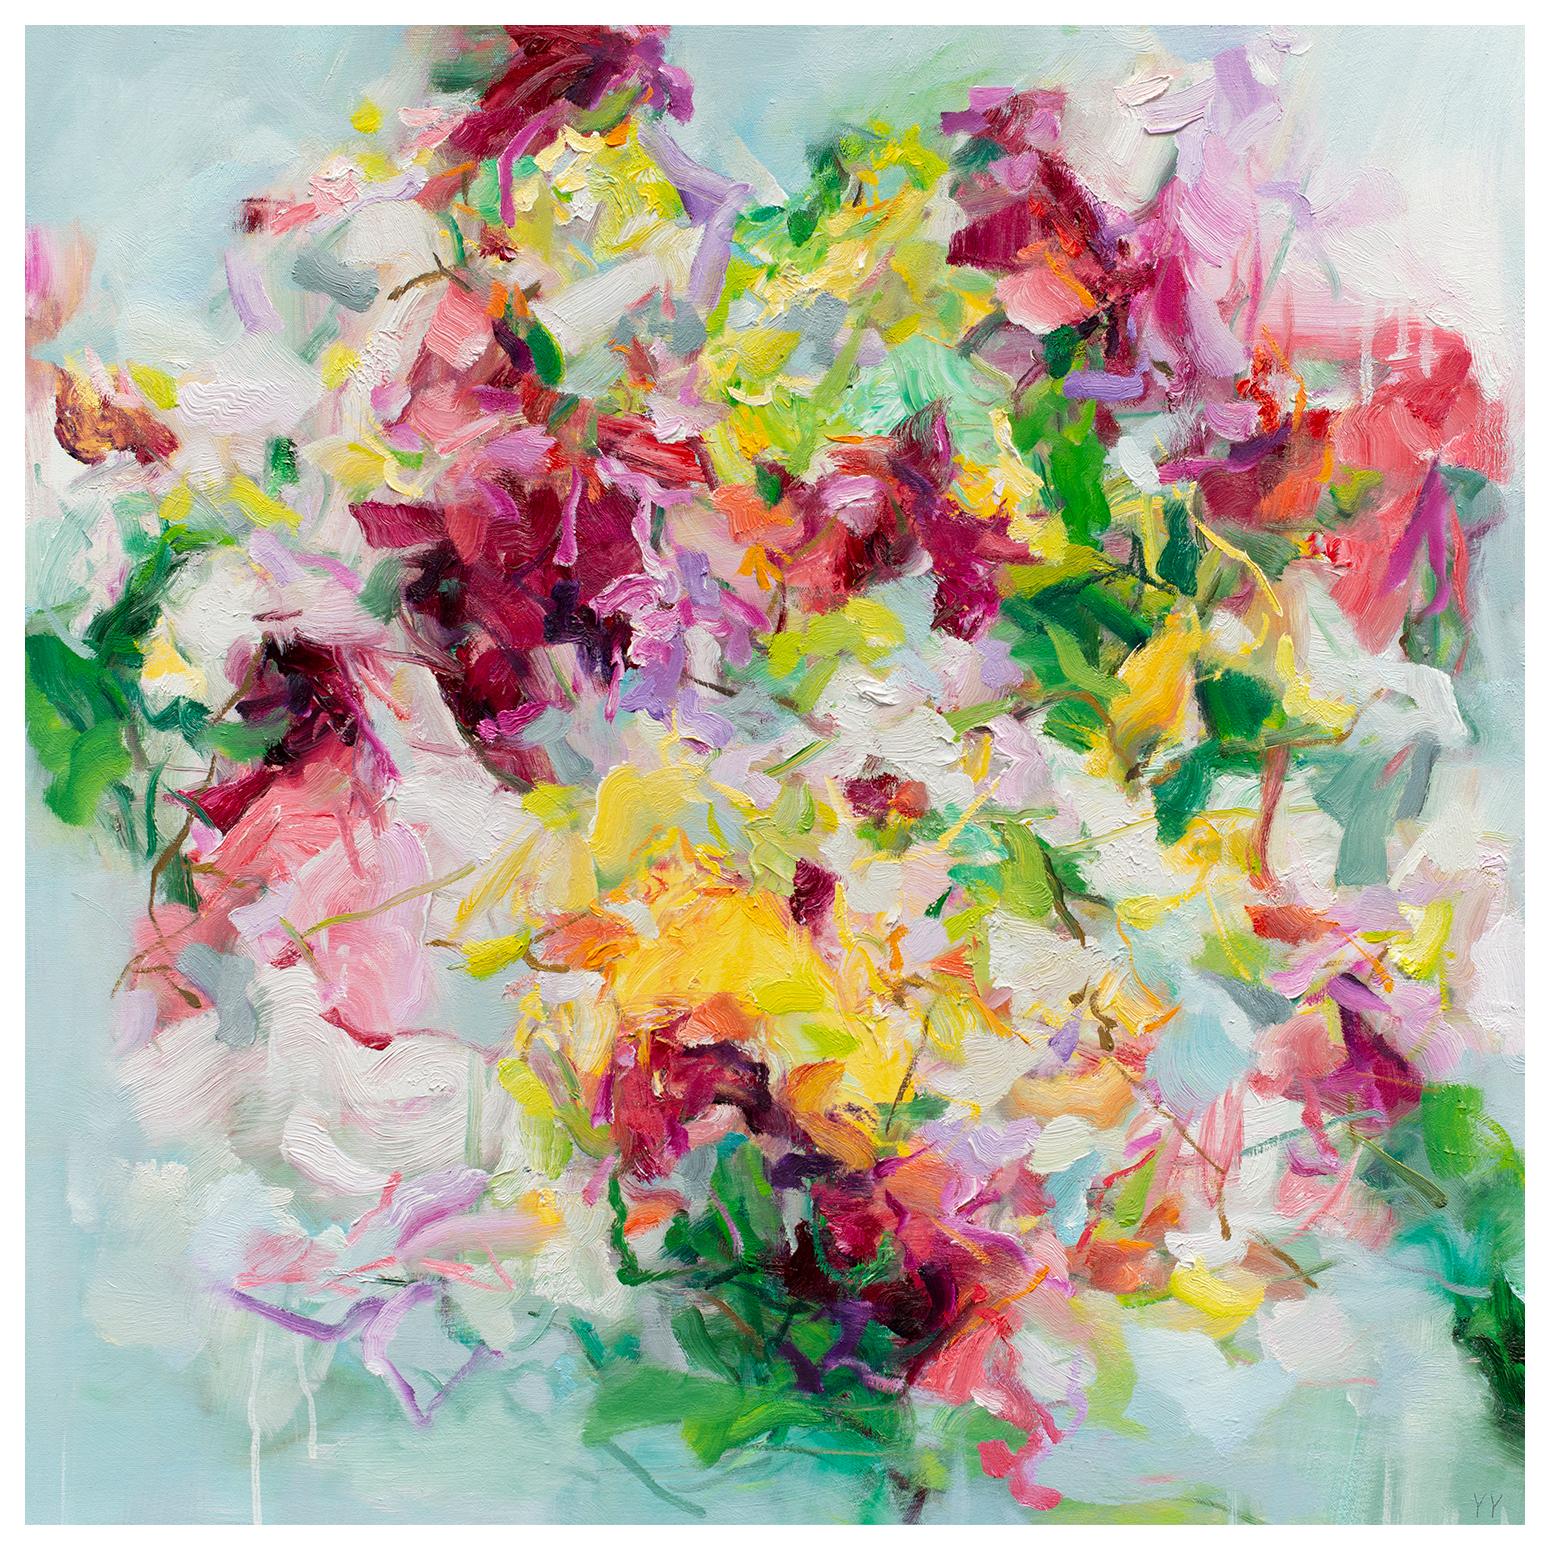 Available at Madelyn Jordon Fine Art. 'Fab' 2023 by Chinese/Canadian artist Yangyang Pan. Oil on canvas, 30 x 30 in. / Frame: 31 x 31 in. This beautiful abstract-expressionistic landscape painting incorporates gestural brushstrokes resembling a